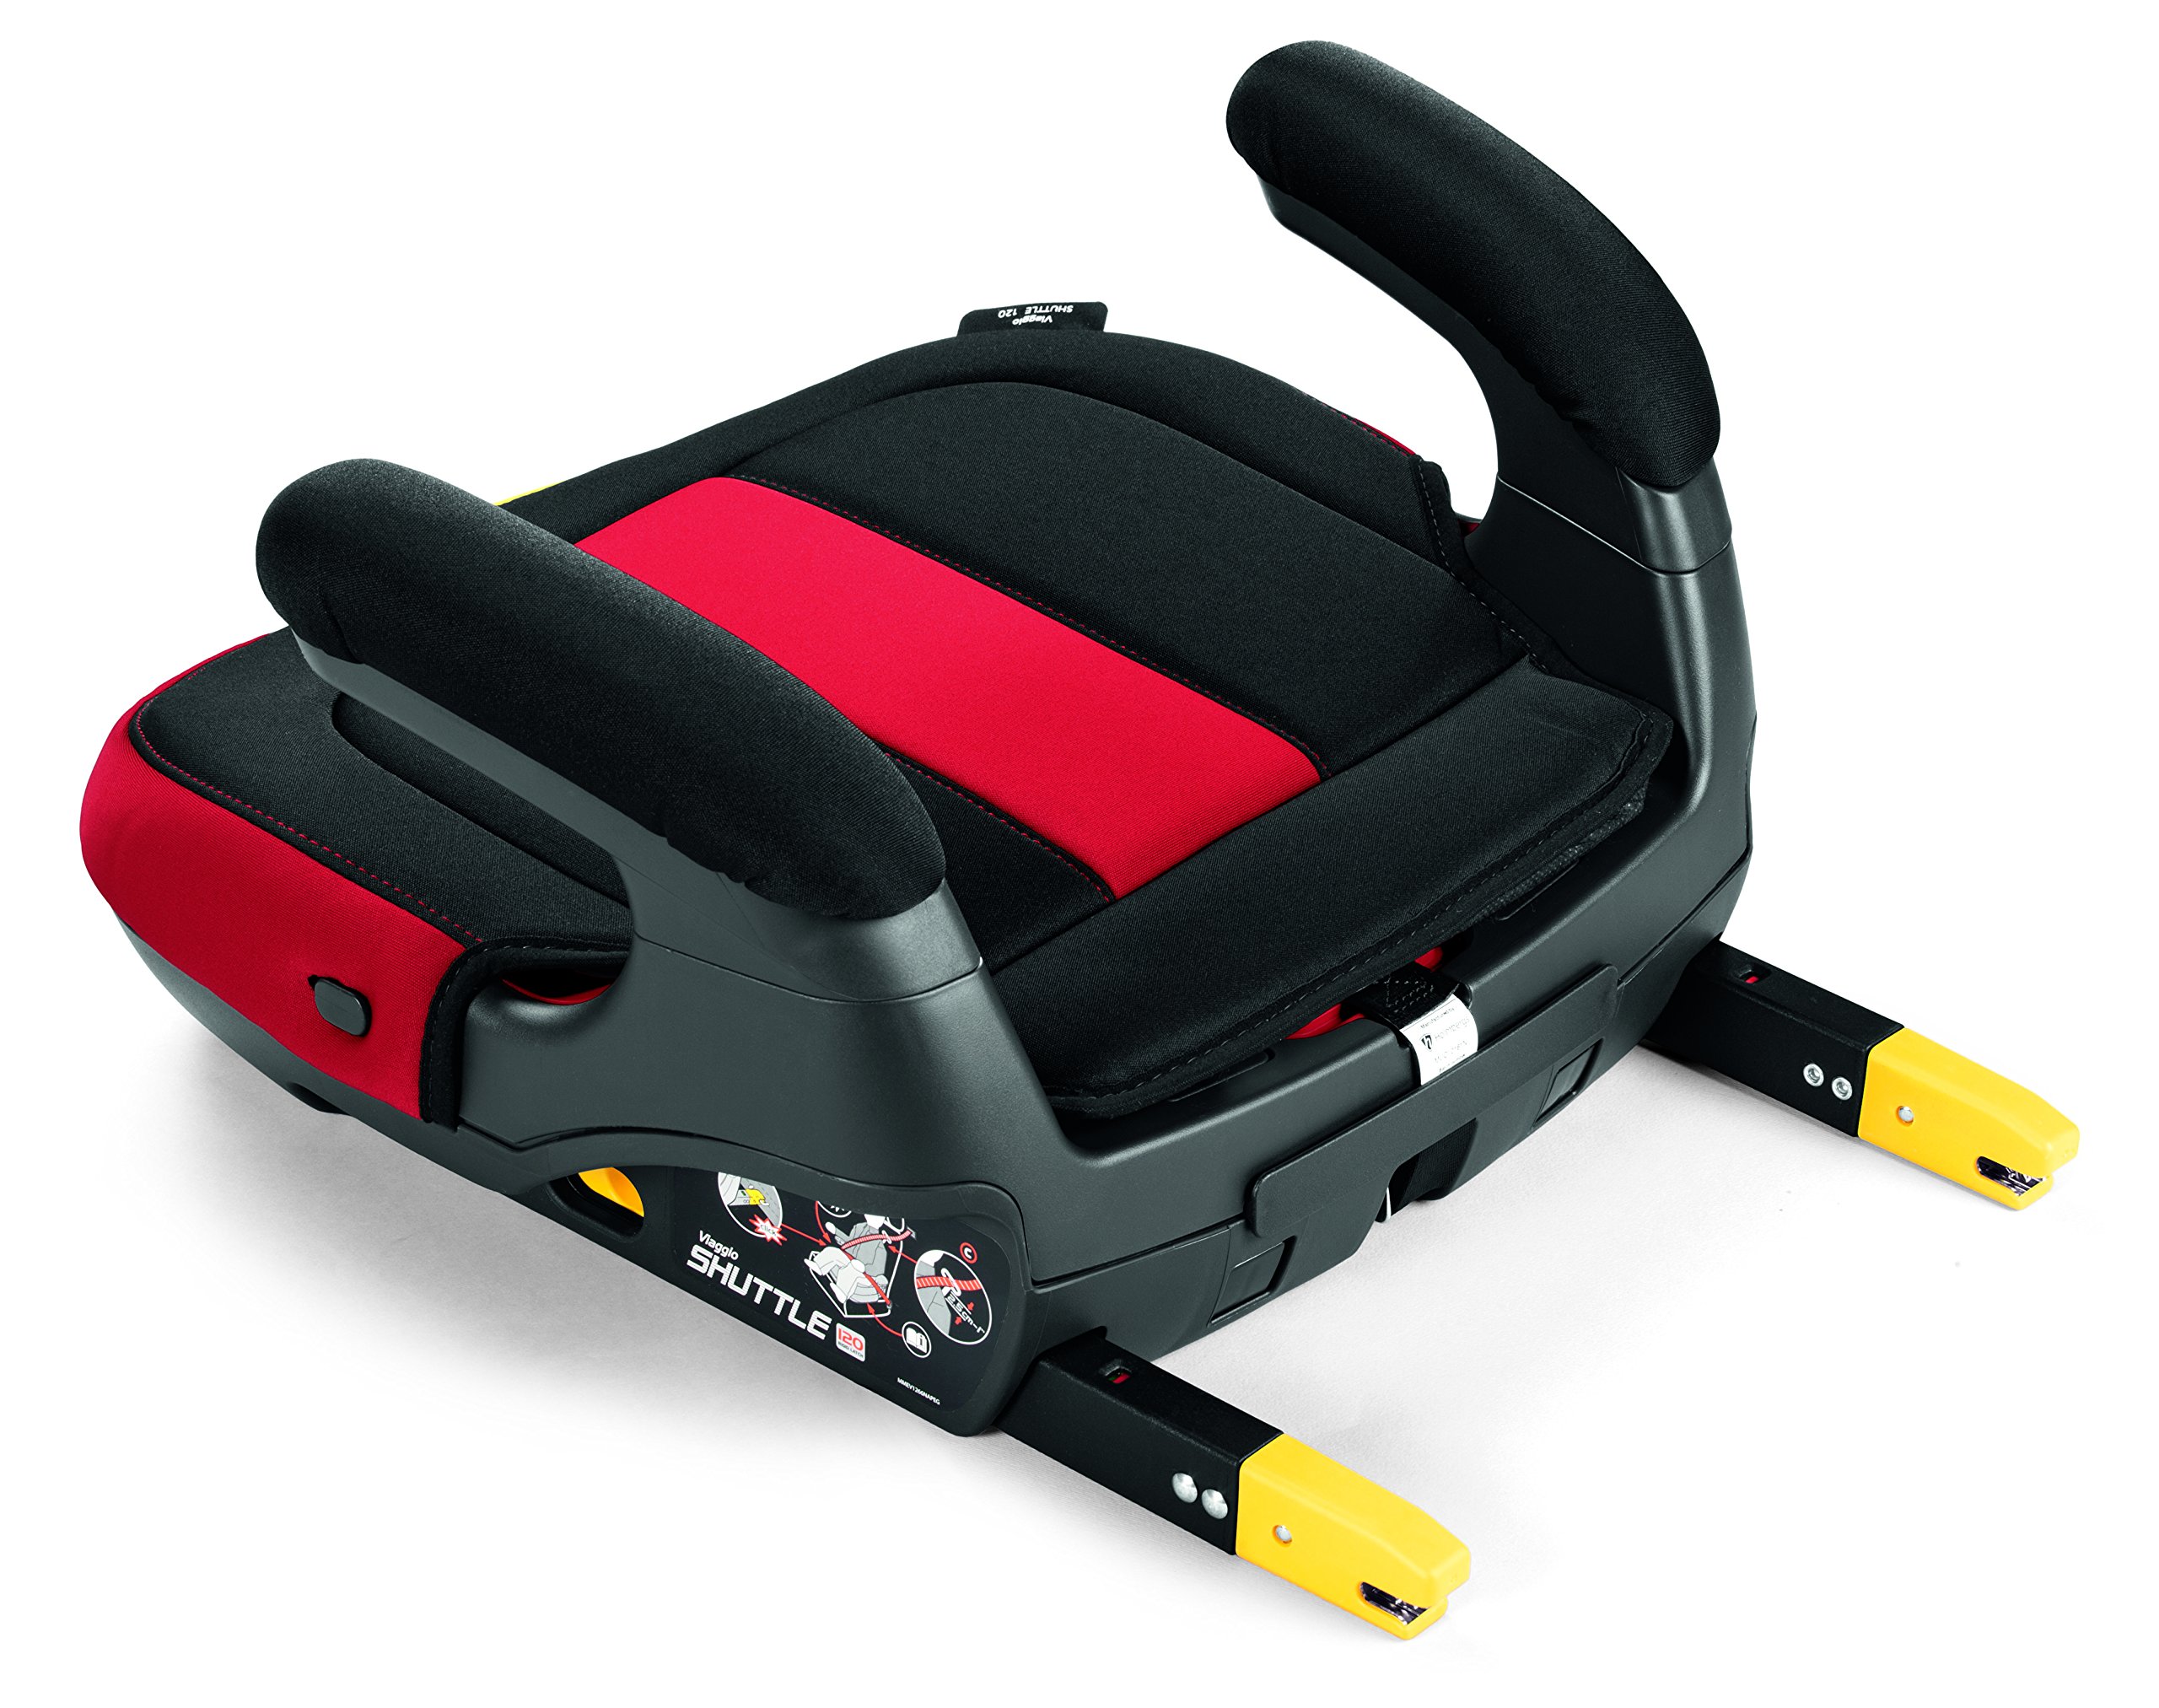 Peg Perego Viaggio Shuttle - Booster Car Seat - for Children from 40 to 120 lbs - Made in Italy - Monza (Black & Red)